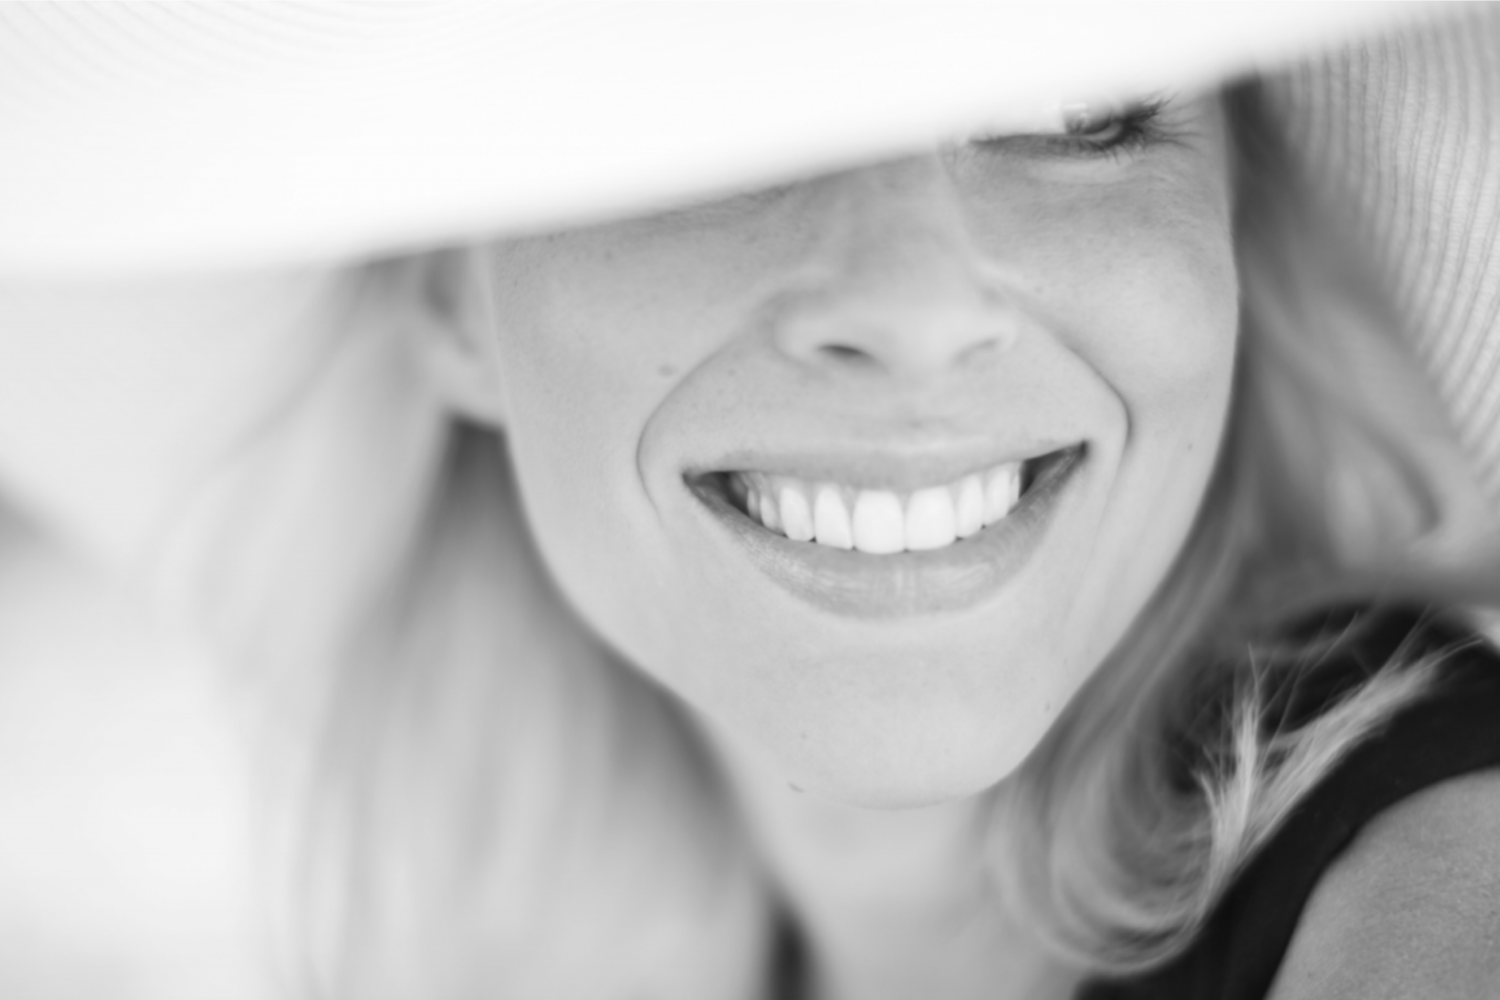 Need to Warm Up Your Summer Smile? Here Are 5 Ways to Make It Happen